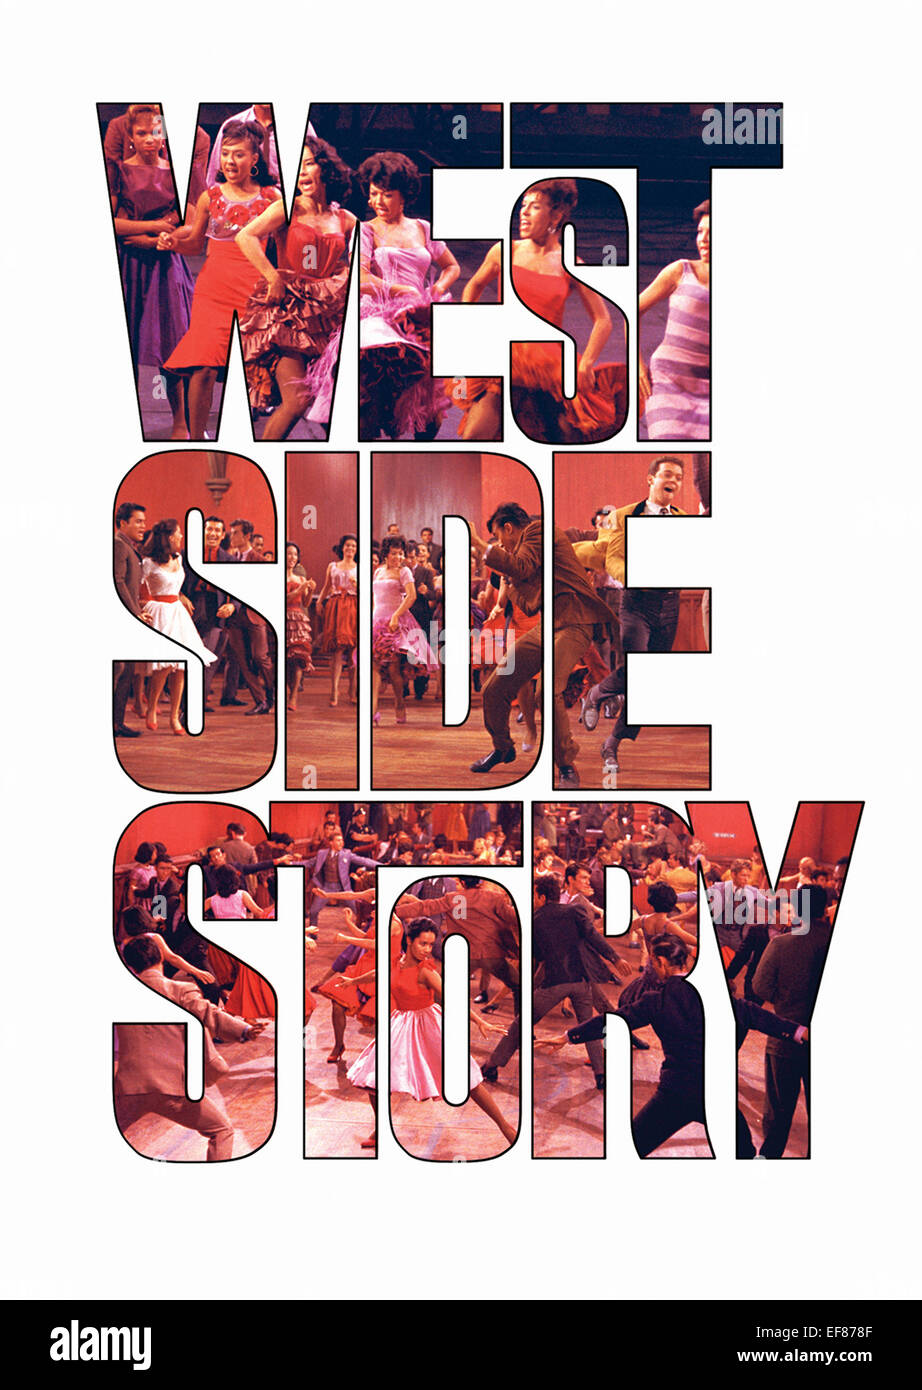 MOVIE POSTER, WEST SIDE STORY, 1961 Stock Photo - Alamy